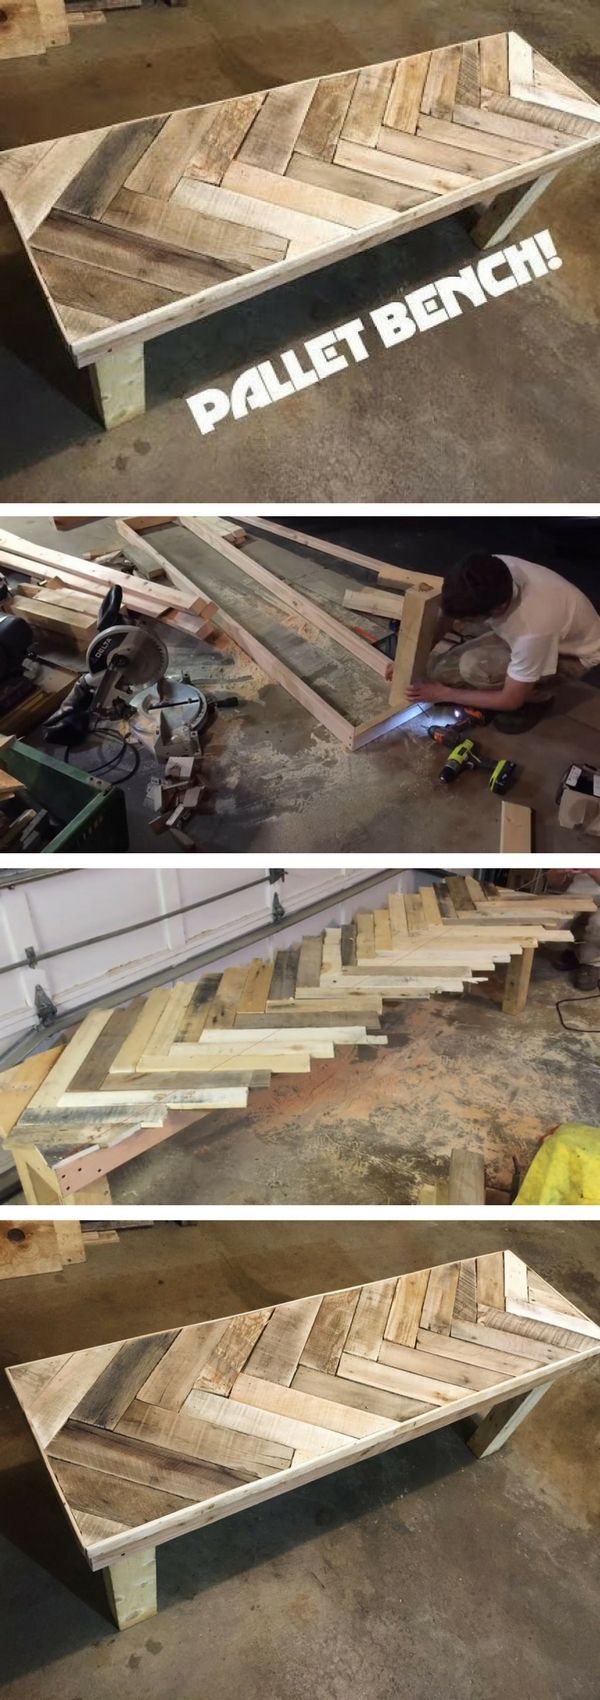 Check out the tutorial on how to make a DIY pallet bench @Industry Standard Design